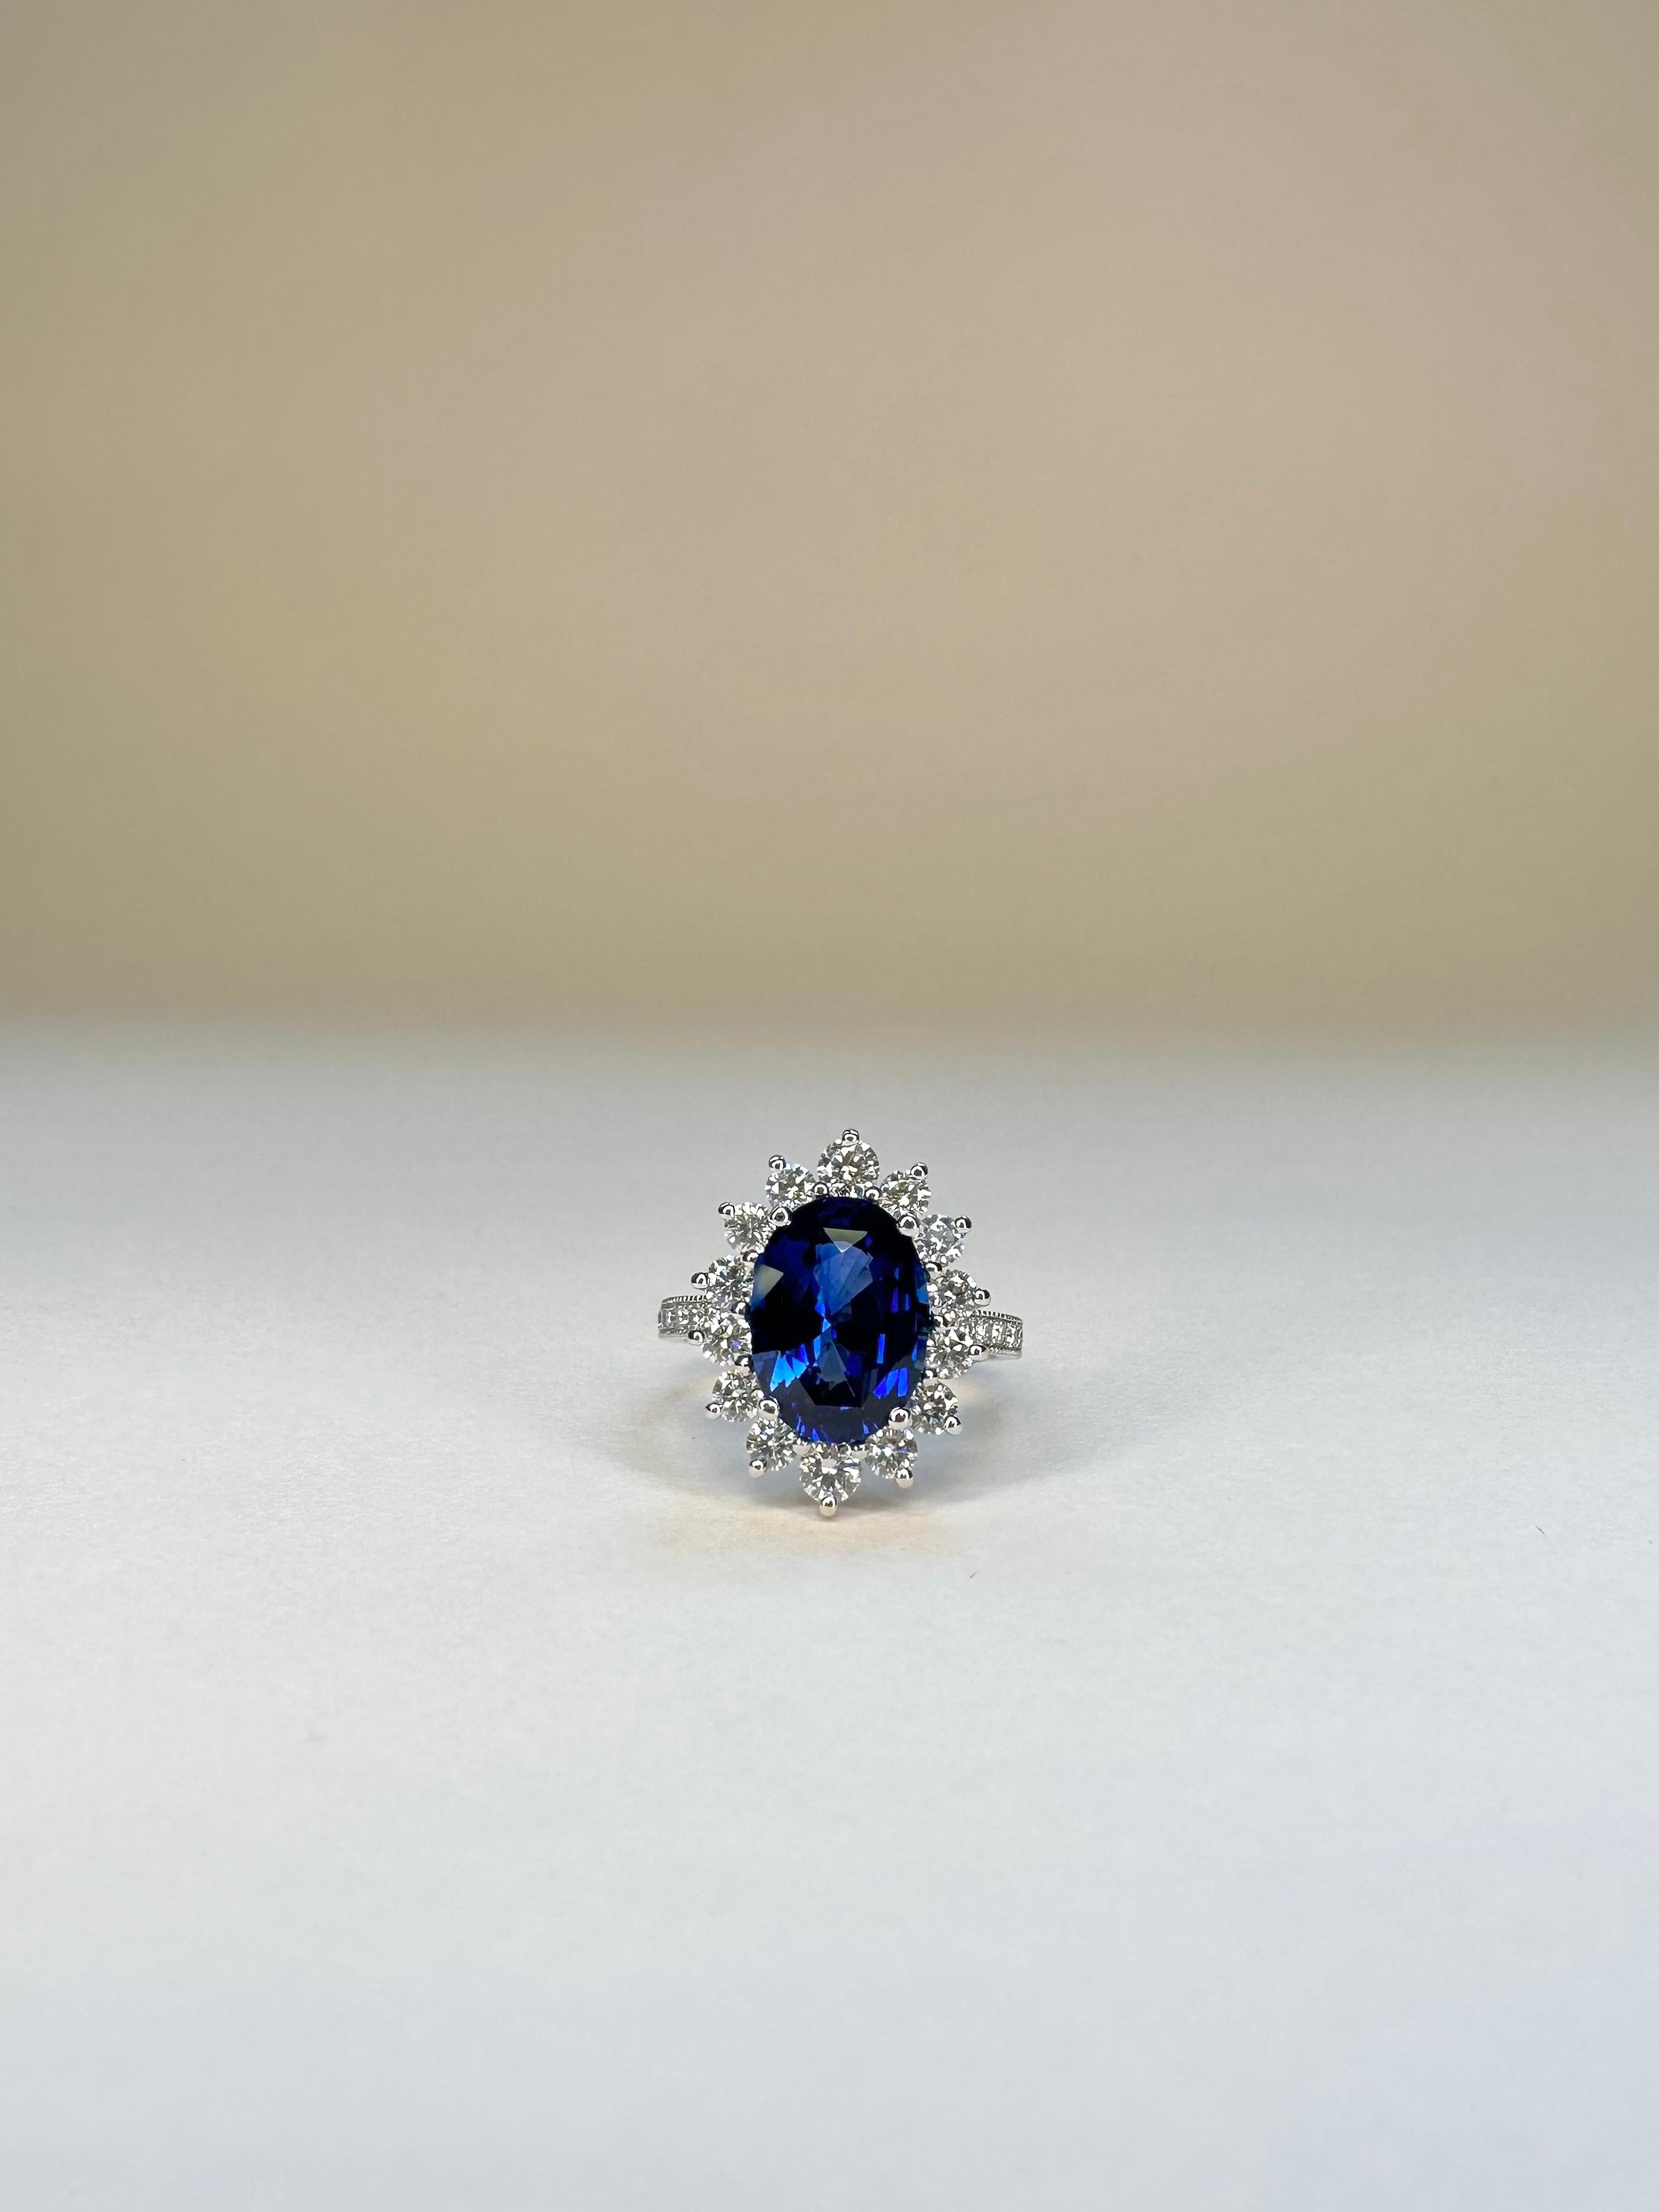 For Sale:  18k White Gold 3.99 Carat Royal Blue Oval Sapphire Ring With 1 Cts of Diamonds 4